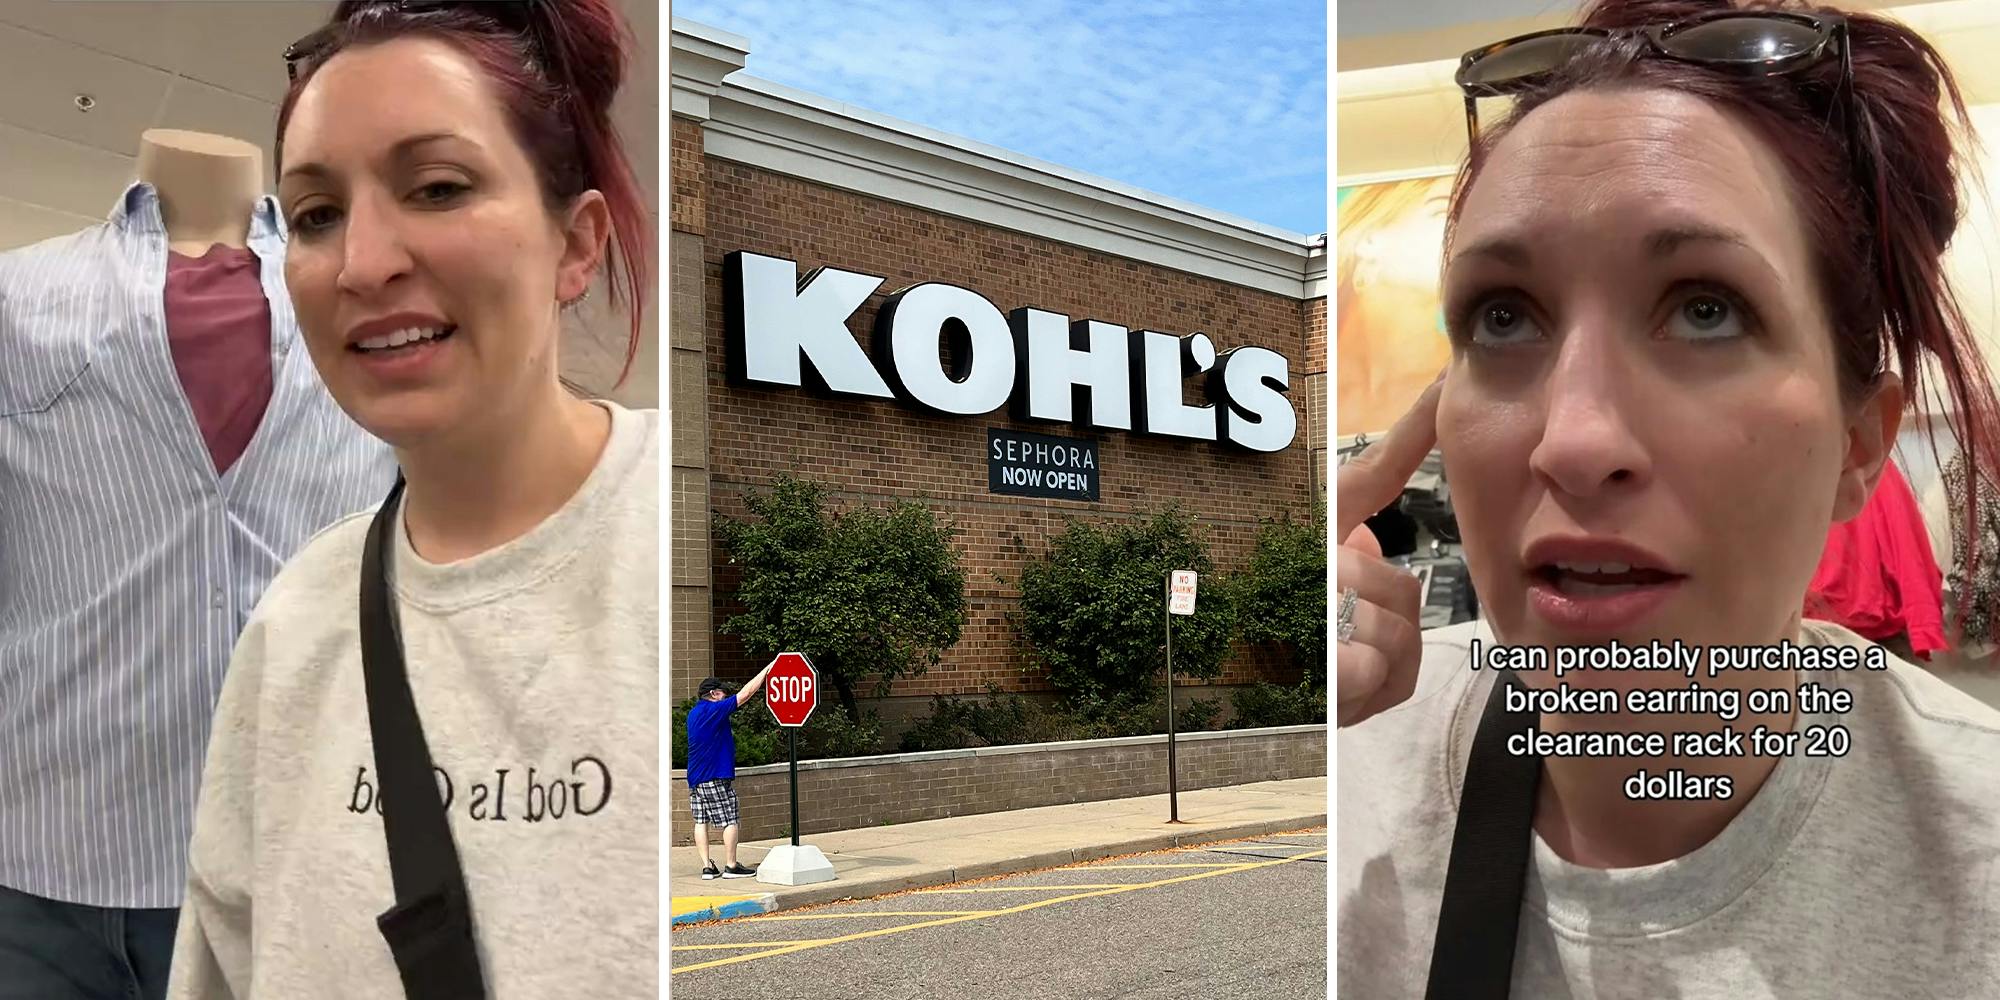 Up to 70% Off Kohl's Clearance  1000's of New Markdowns Added - The  Freebie Guy: Freebies, Penny Shopping, Deals, & Giveaways